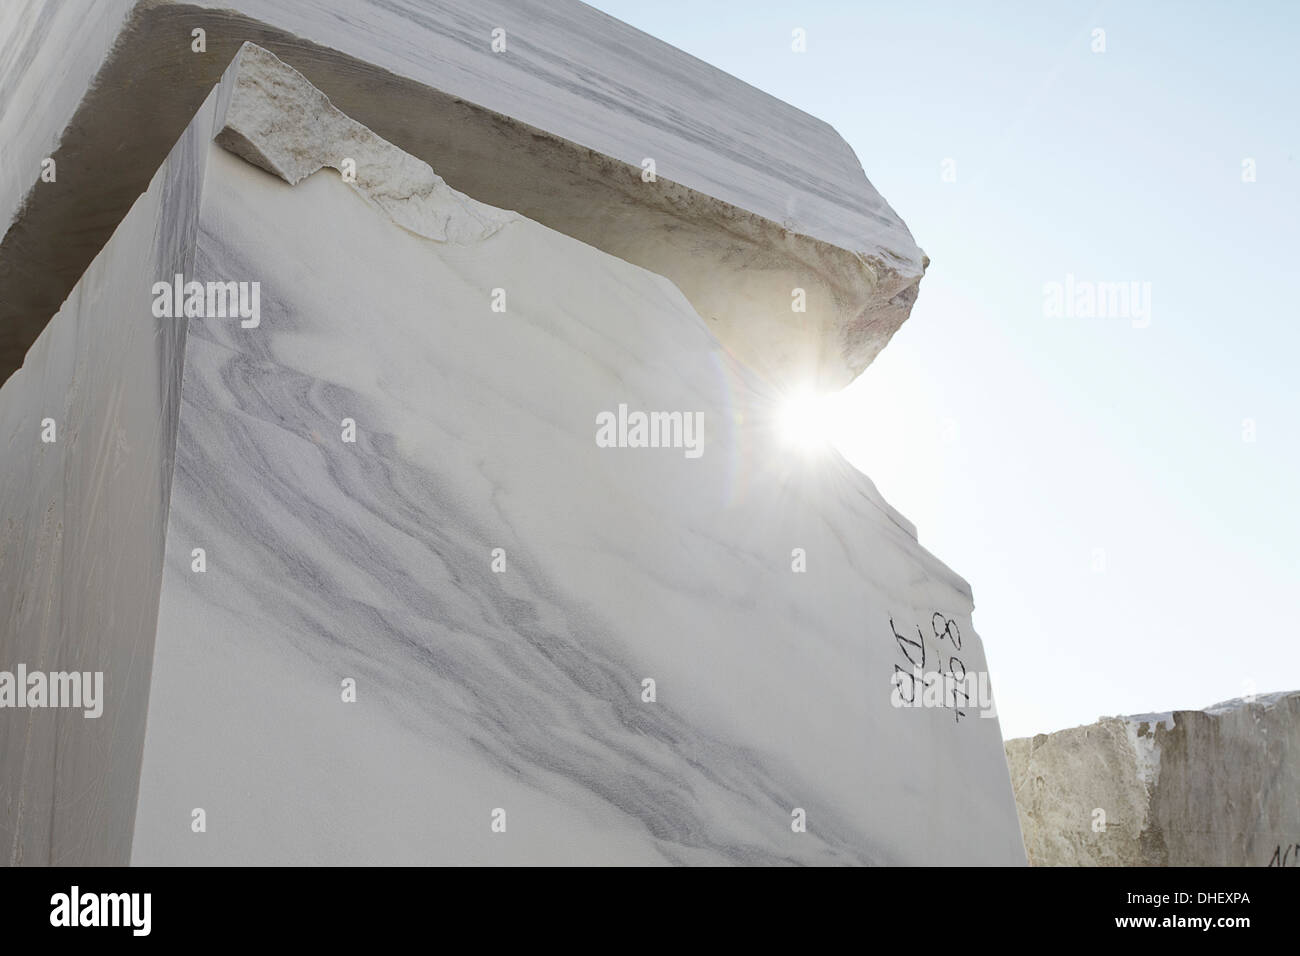 Large block of marble from quarry Stock Photo